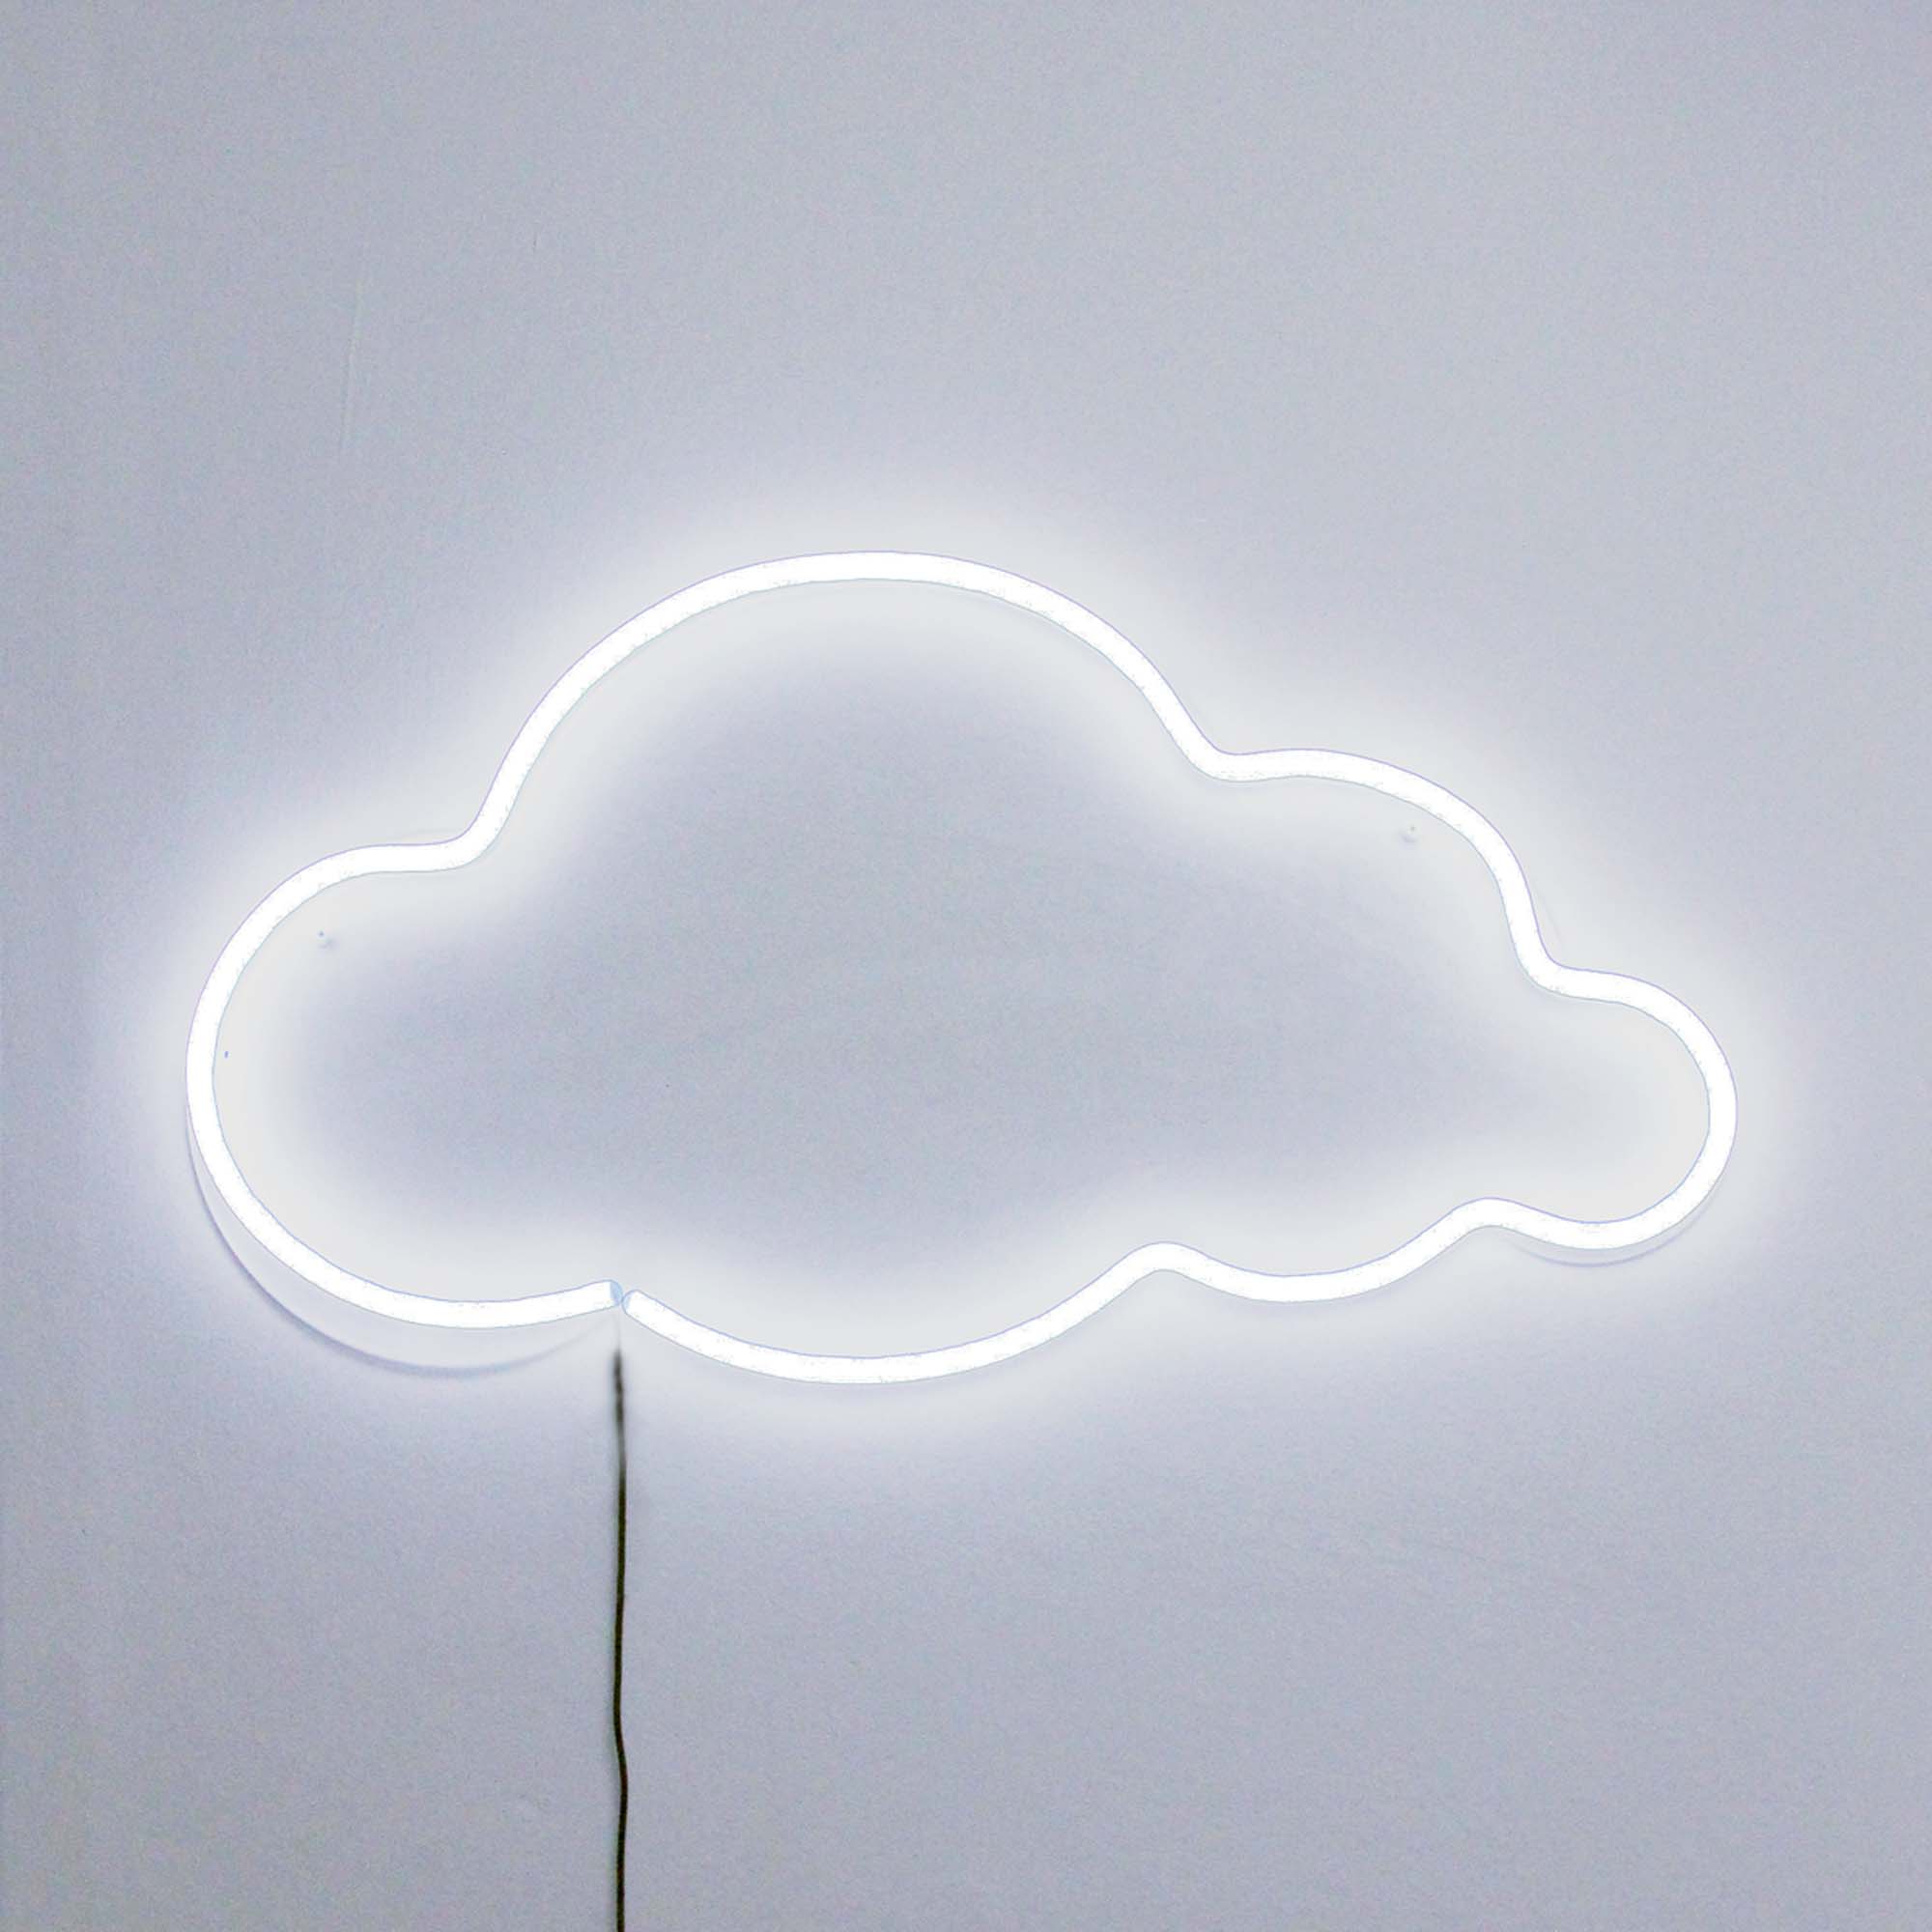 White neon cloud by Bxxlght